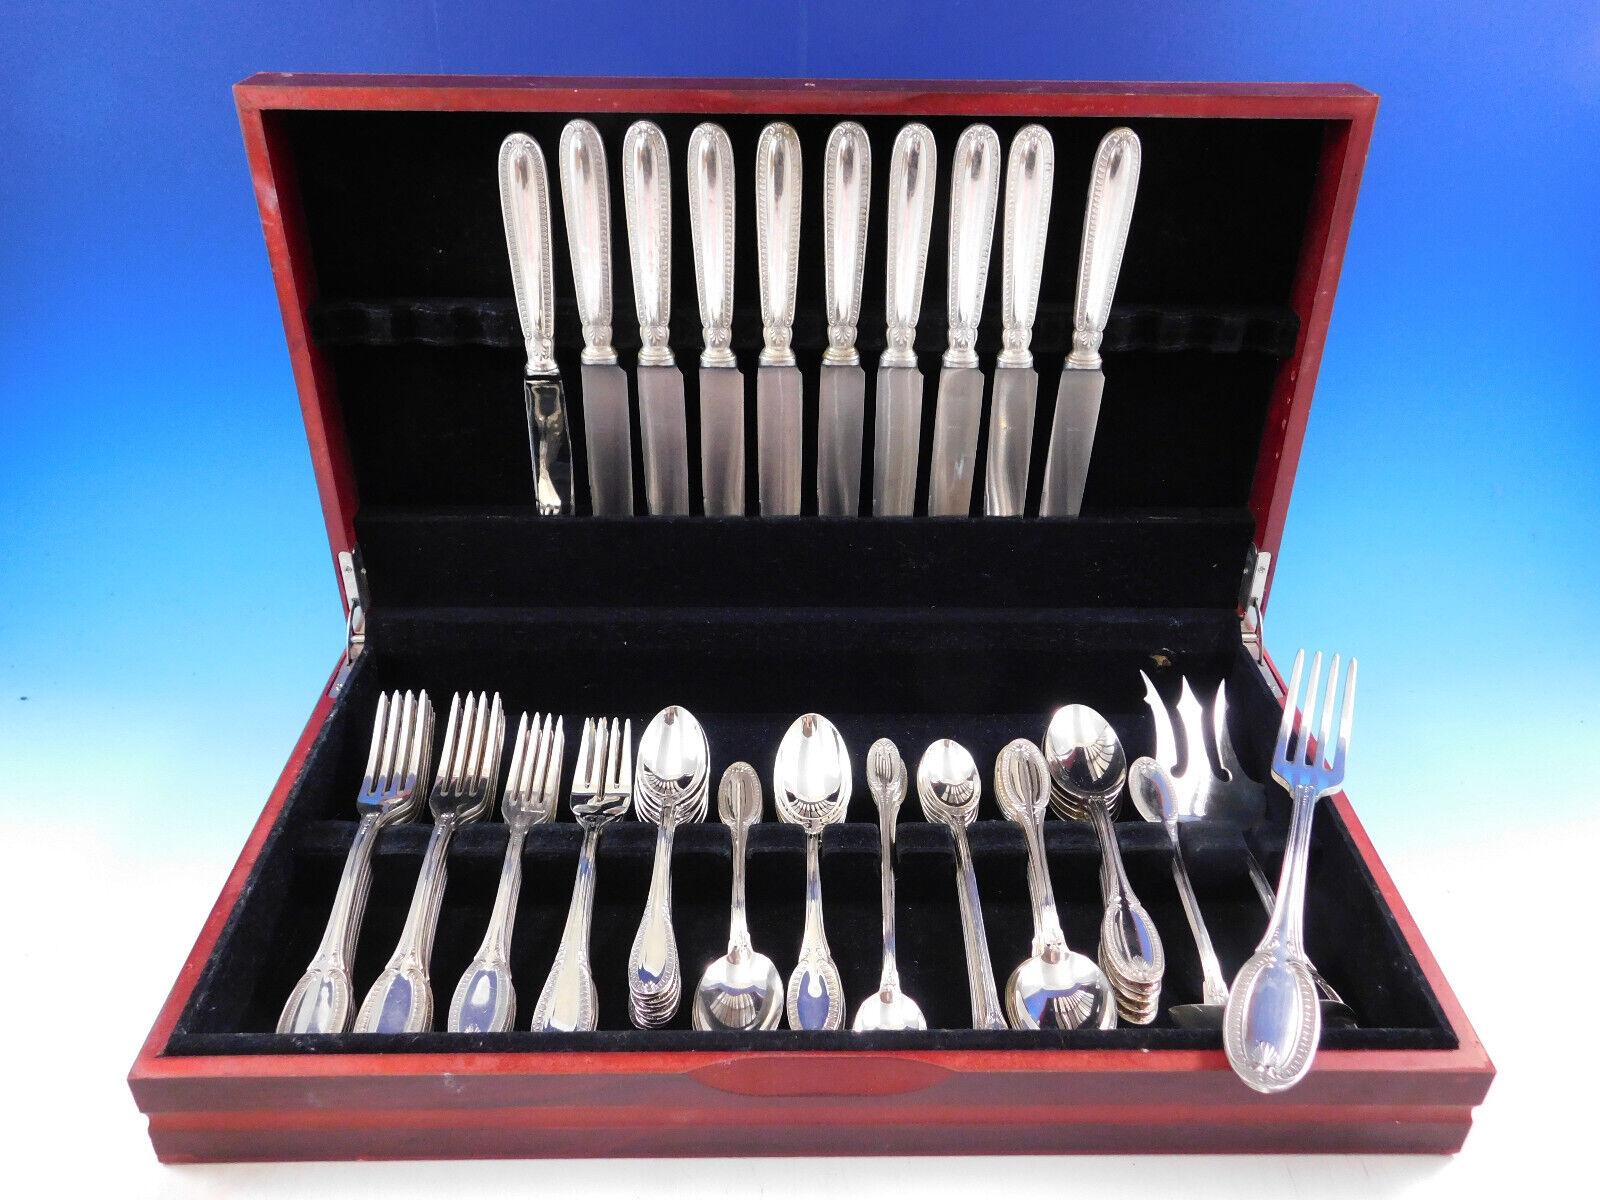 Gorgeous Dinner Size Empire Italy Sterling Silver Flatware set - 71 pieces. This set includes:

10 Large Dinner Size Knives, 9 - 9 7/8